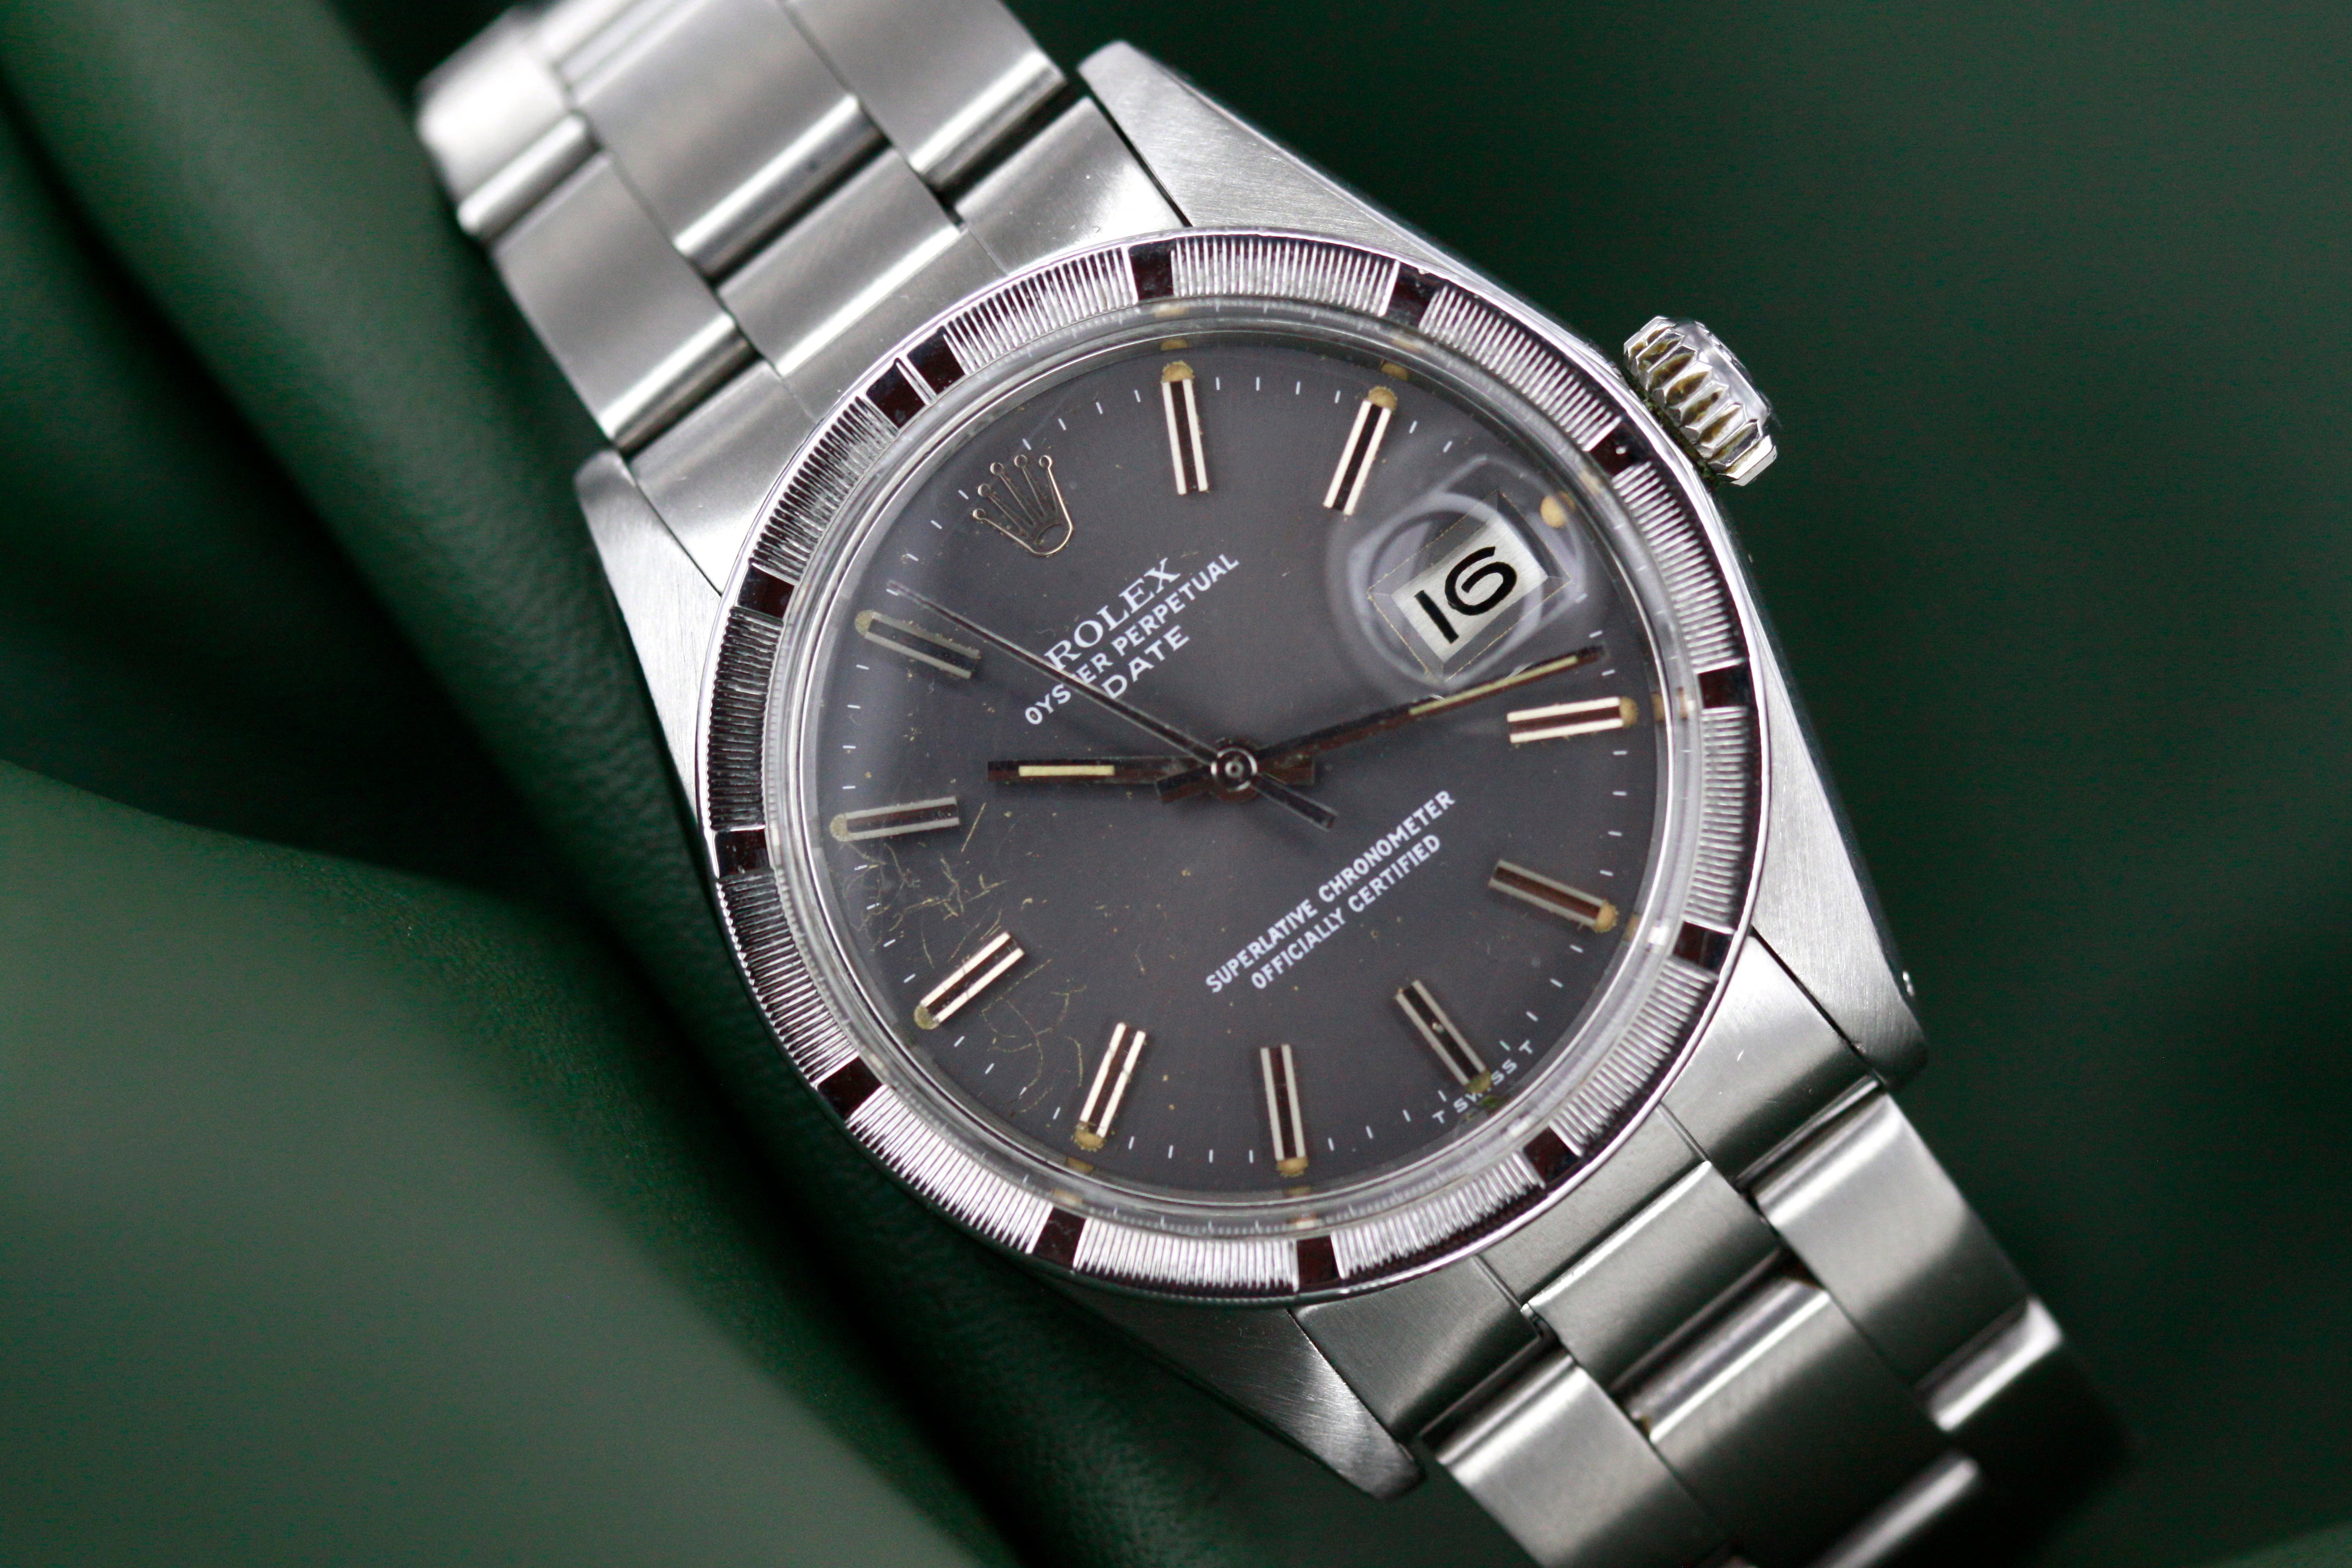 Rolex Date ref 1501 GREY dial from 1975 with nice patina